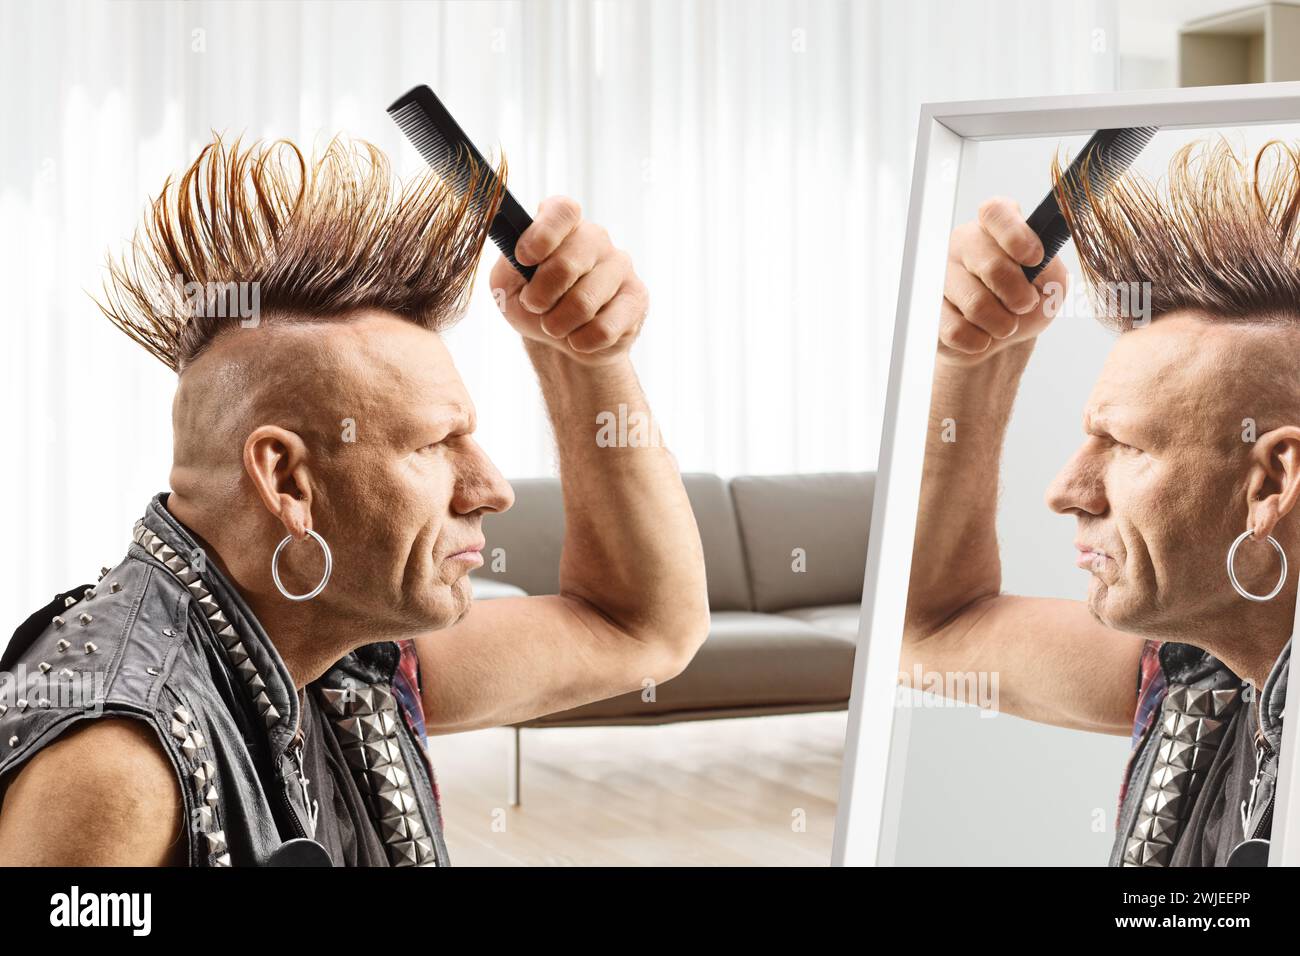 Man combing his mohawk hairstyle with a brush in front of a mirror at home Stock Photo